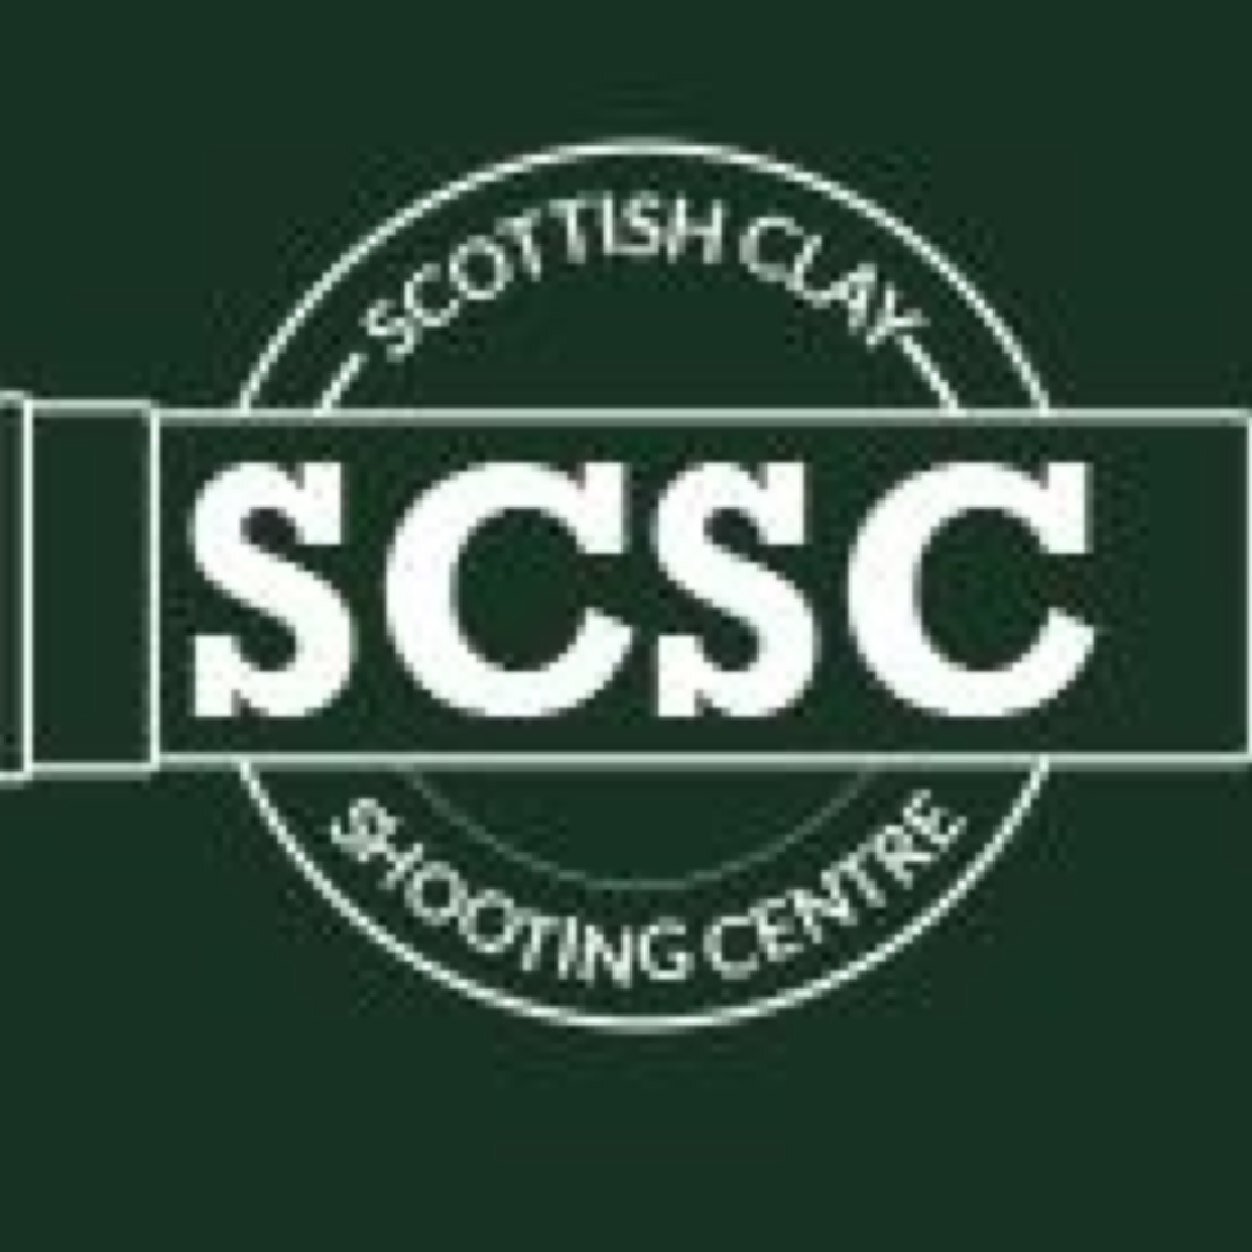 Welcome to the Scottish Clay Shooting Centre, Fife. Targets for beginners & experienced shooters, skeet & ISU skeet, simulated flush, high tower with twin traps